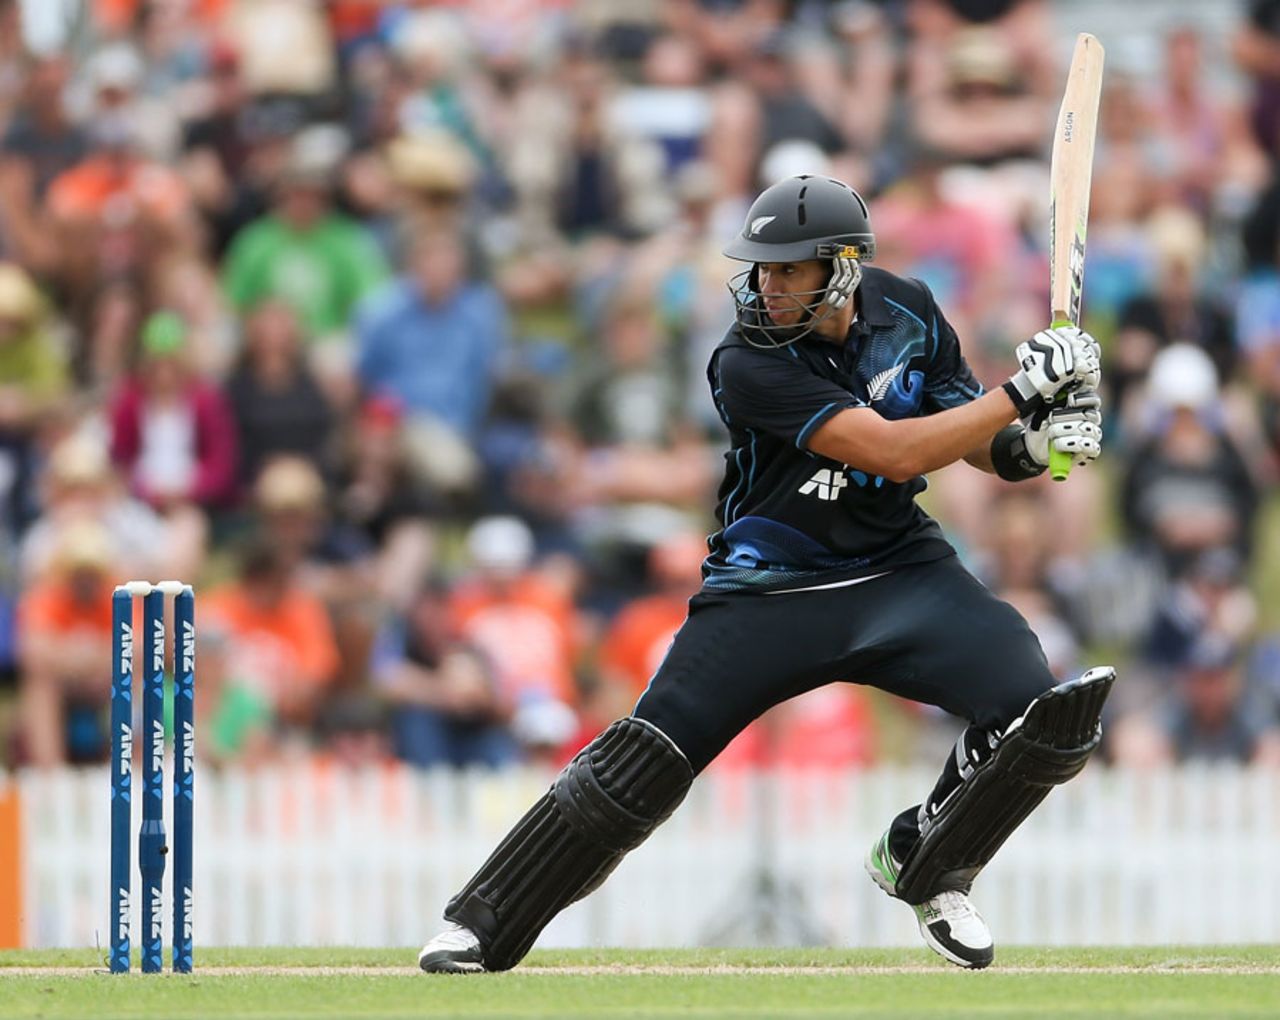 Ross Taylor watches the ball after cutting it behind point, New Zealand v West Indies, 4th ODI, Nelson, January 4, 2014